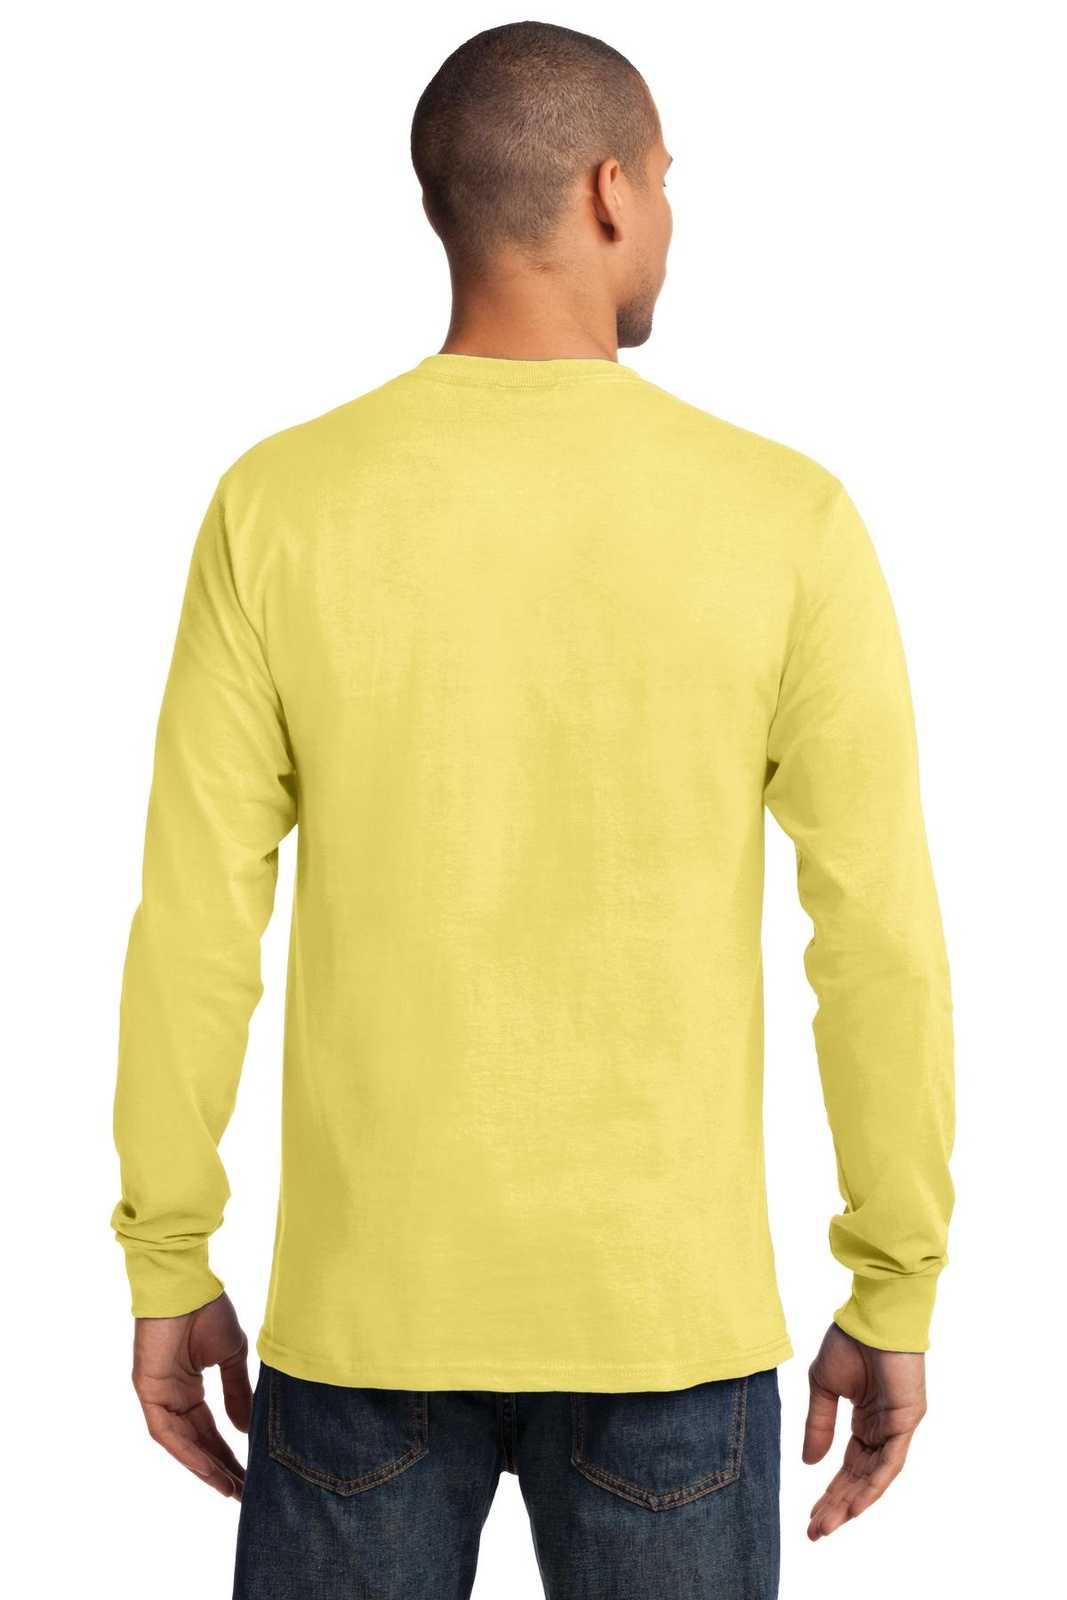 Port & Company PC61LS Long Sleeve Essential Tee - Yellow - HIT a Double - 1